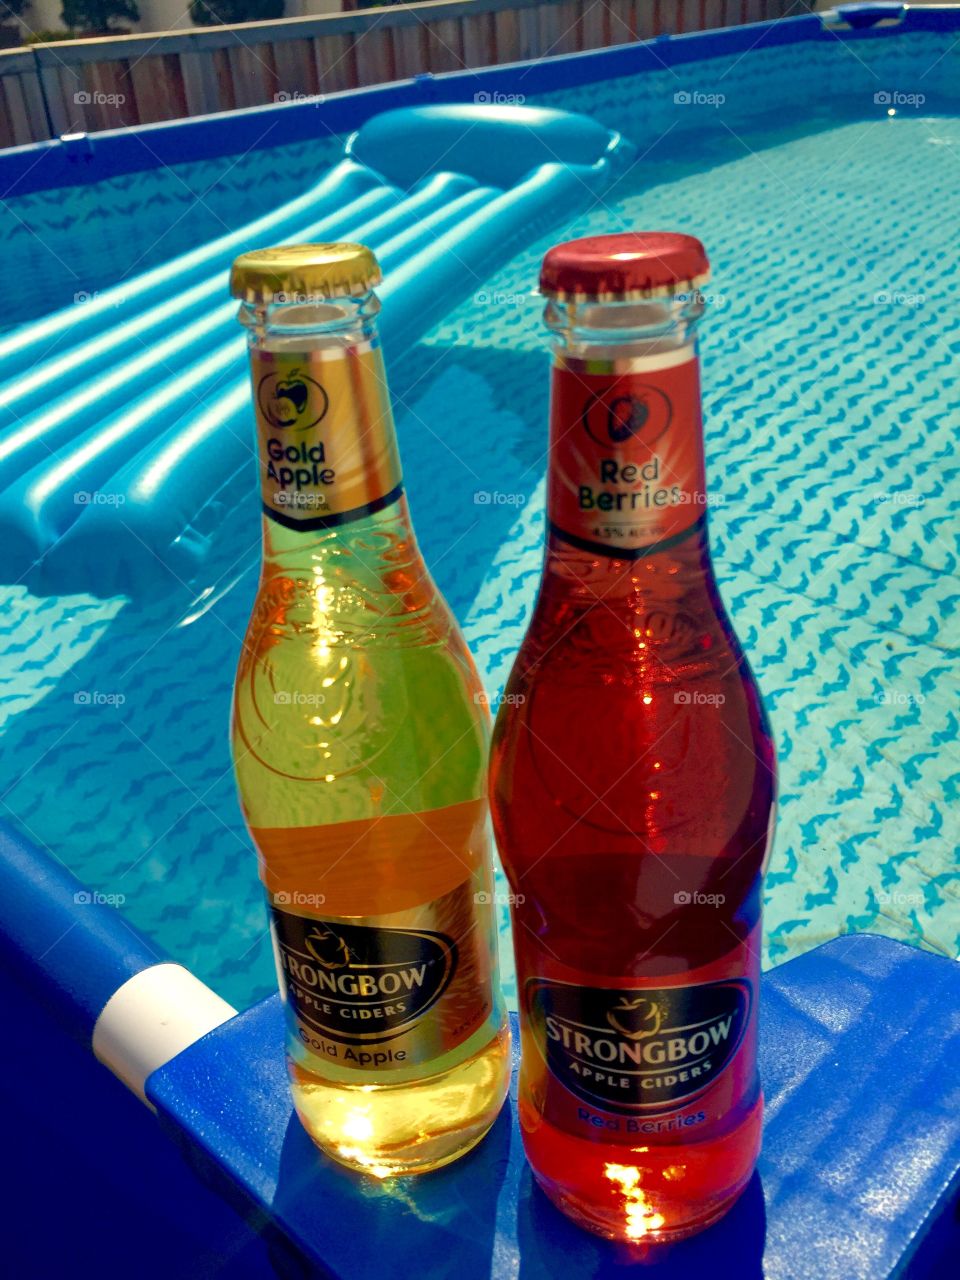 Strongbow by the pool